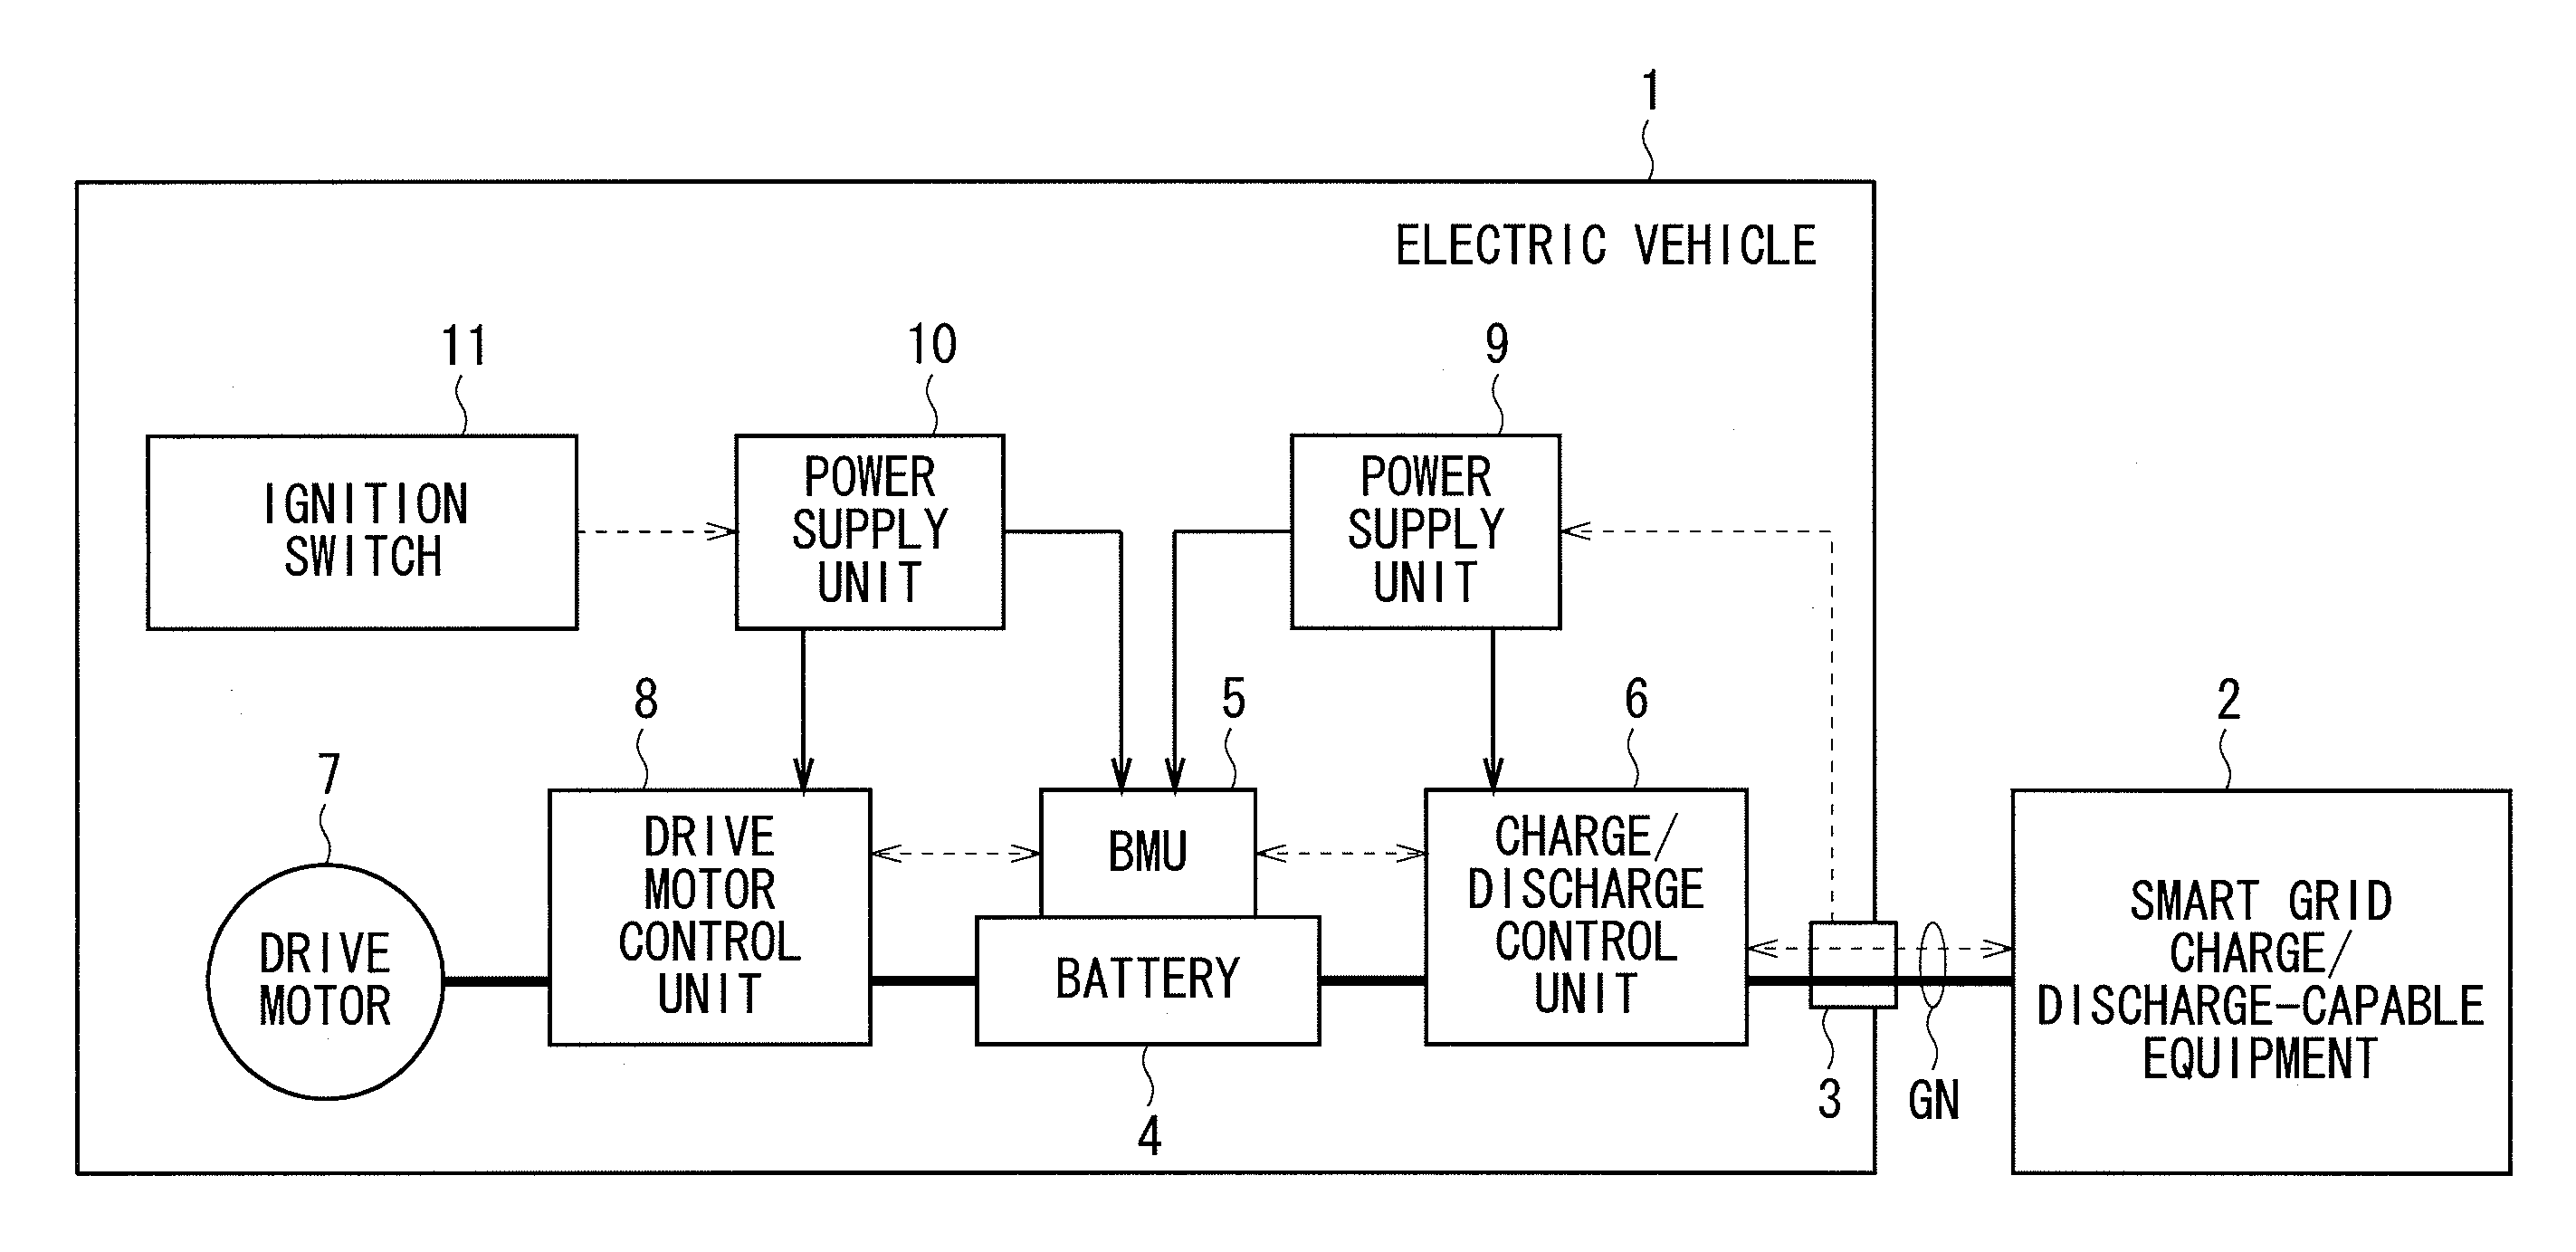 Charge/discharge system